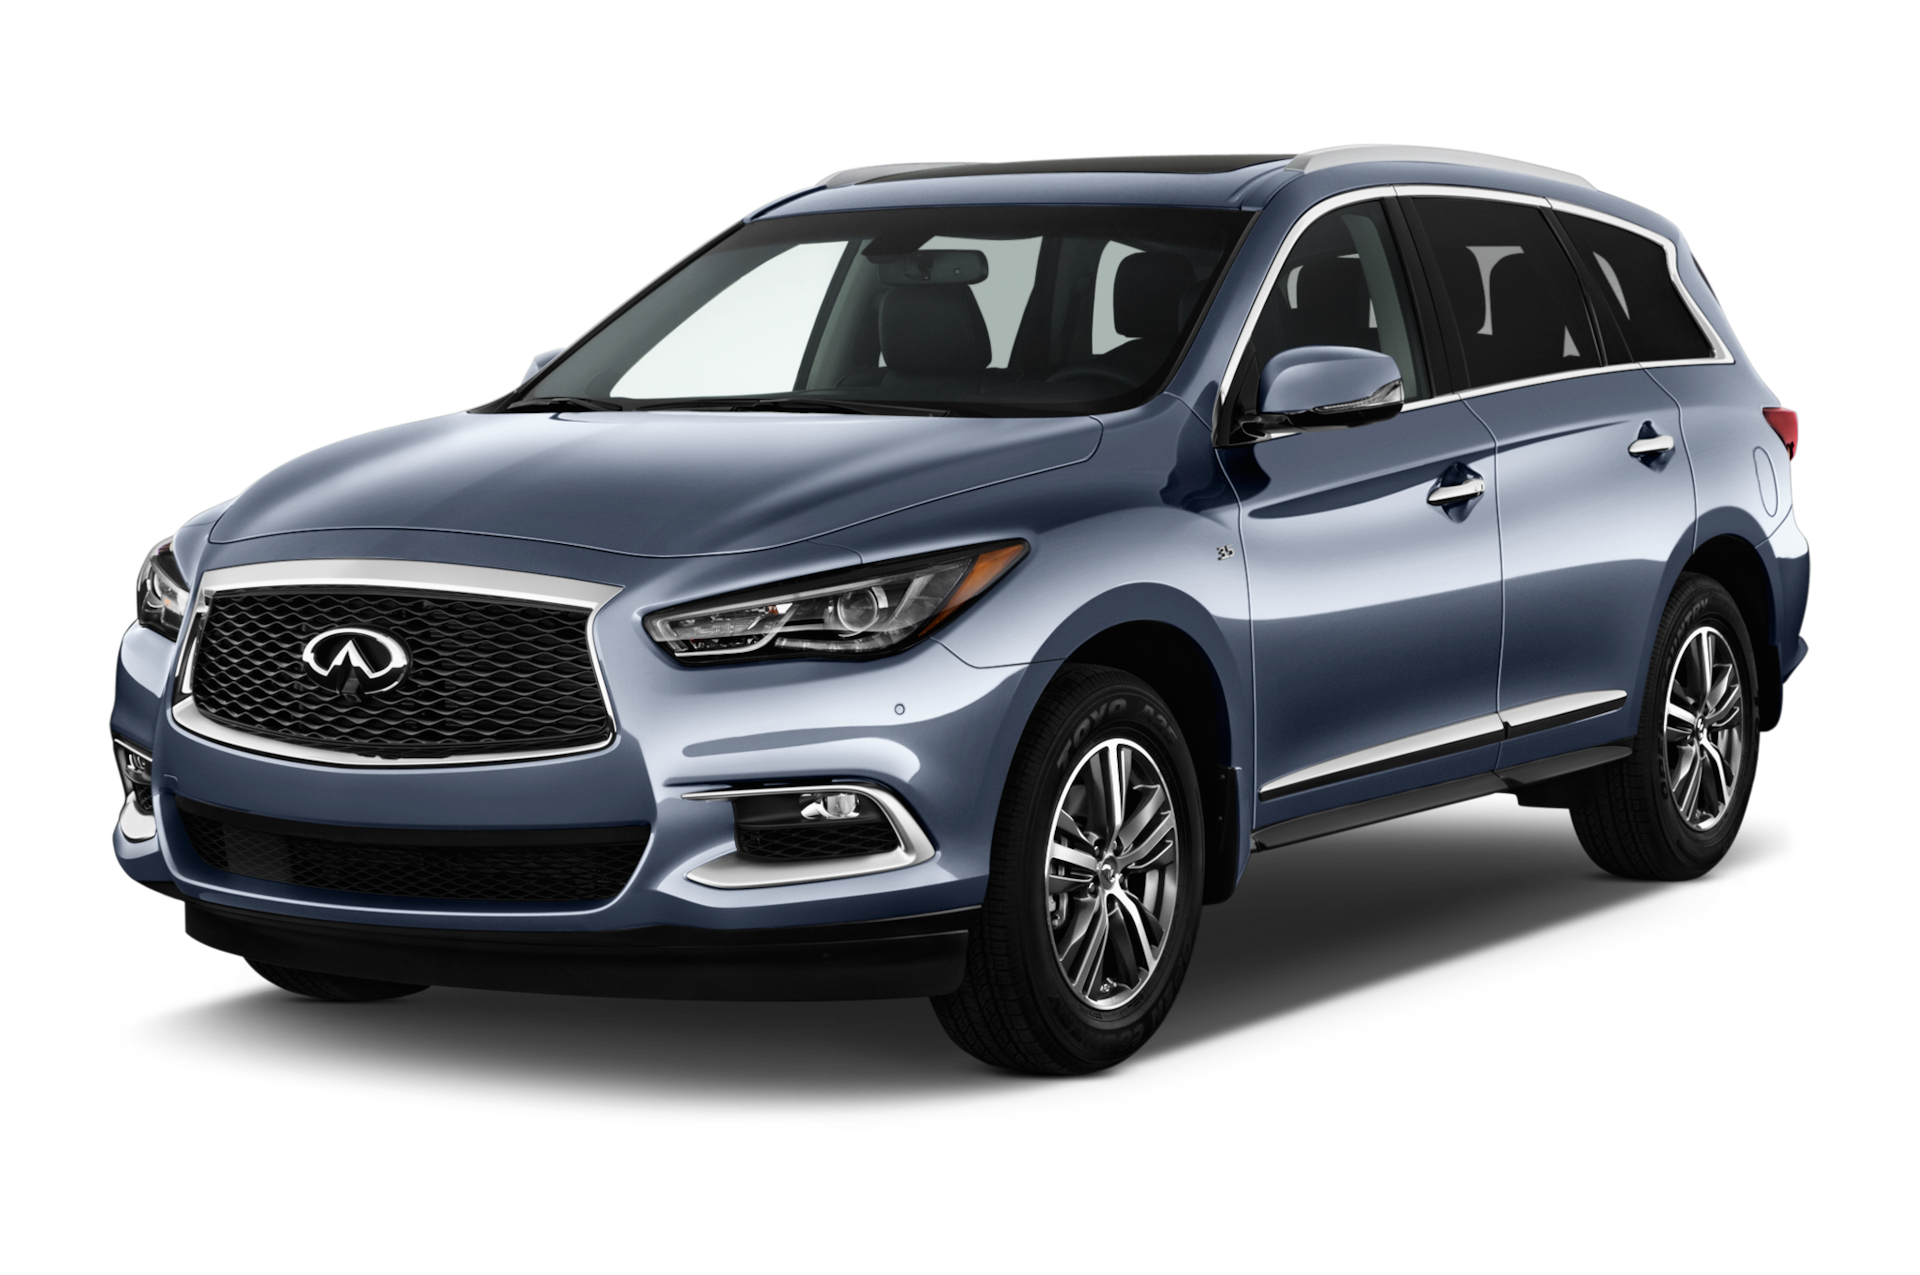 2017 Infiniti QX60 Prices, Reviews, and Photos - MotorTrend